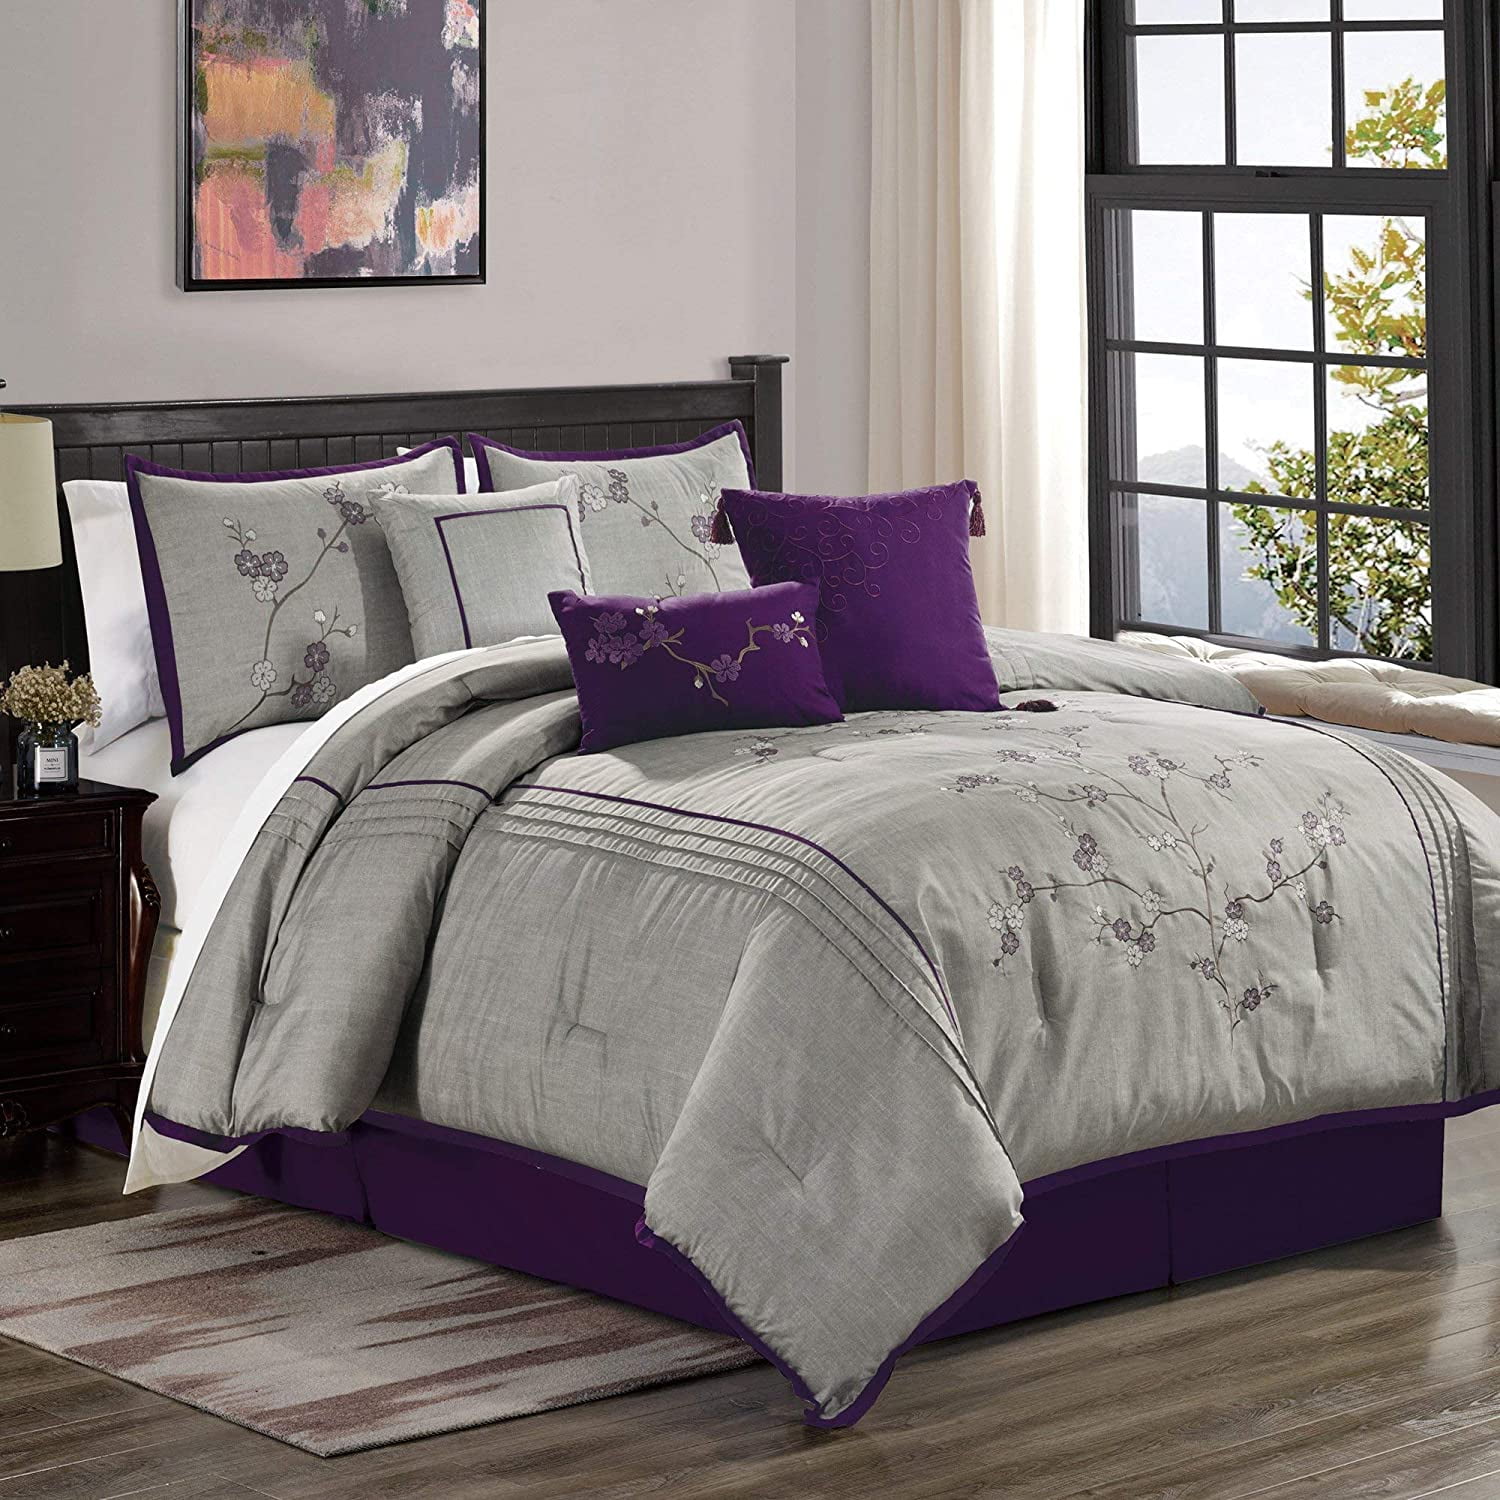 Luxury Embroidery Purple Floral  7-Piece-Comforter-Set-Bed-in-a-Bag Home Decor. 